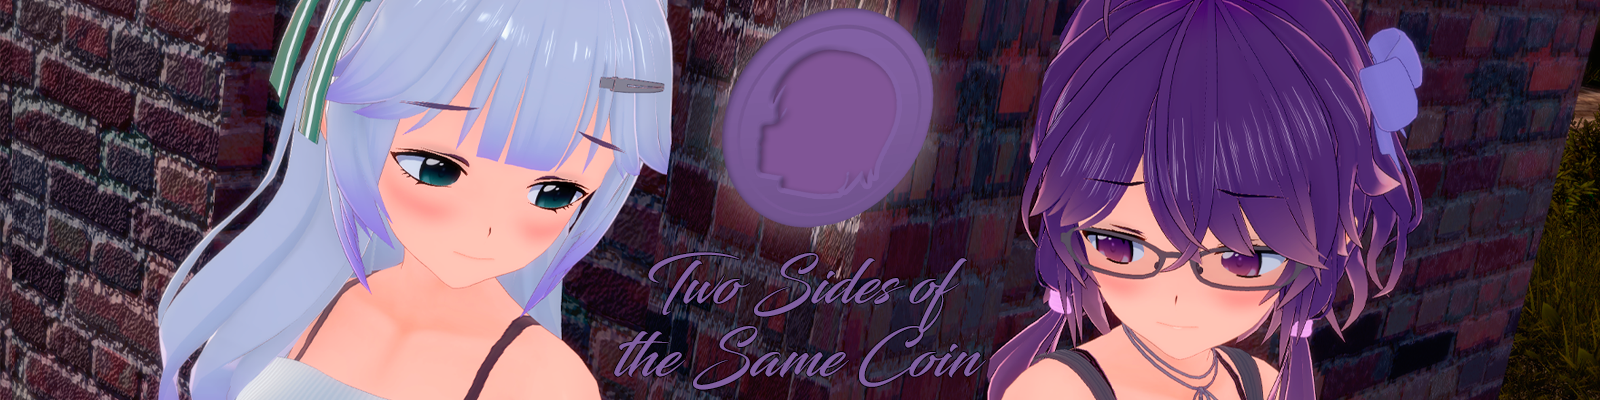 Two Sides of the Same Coin poster